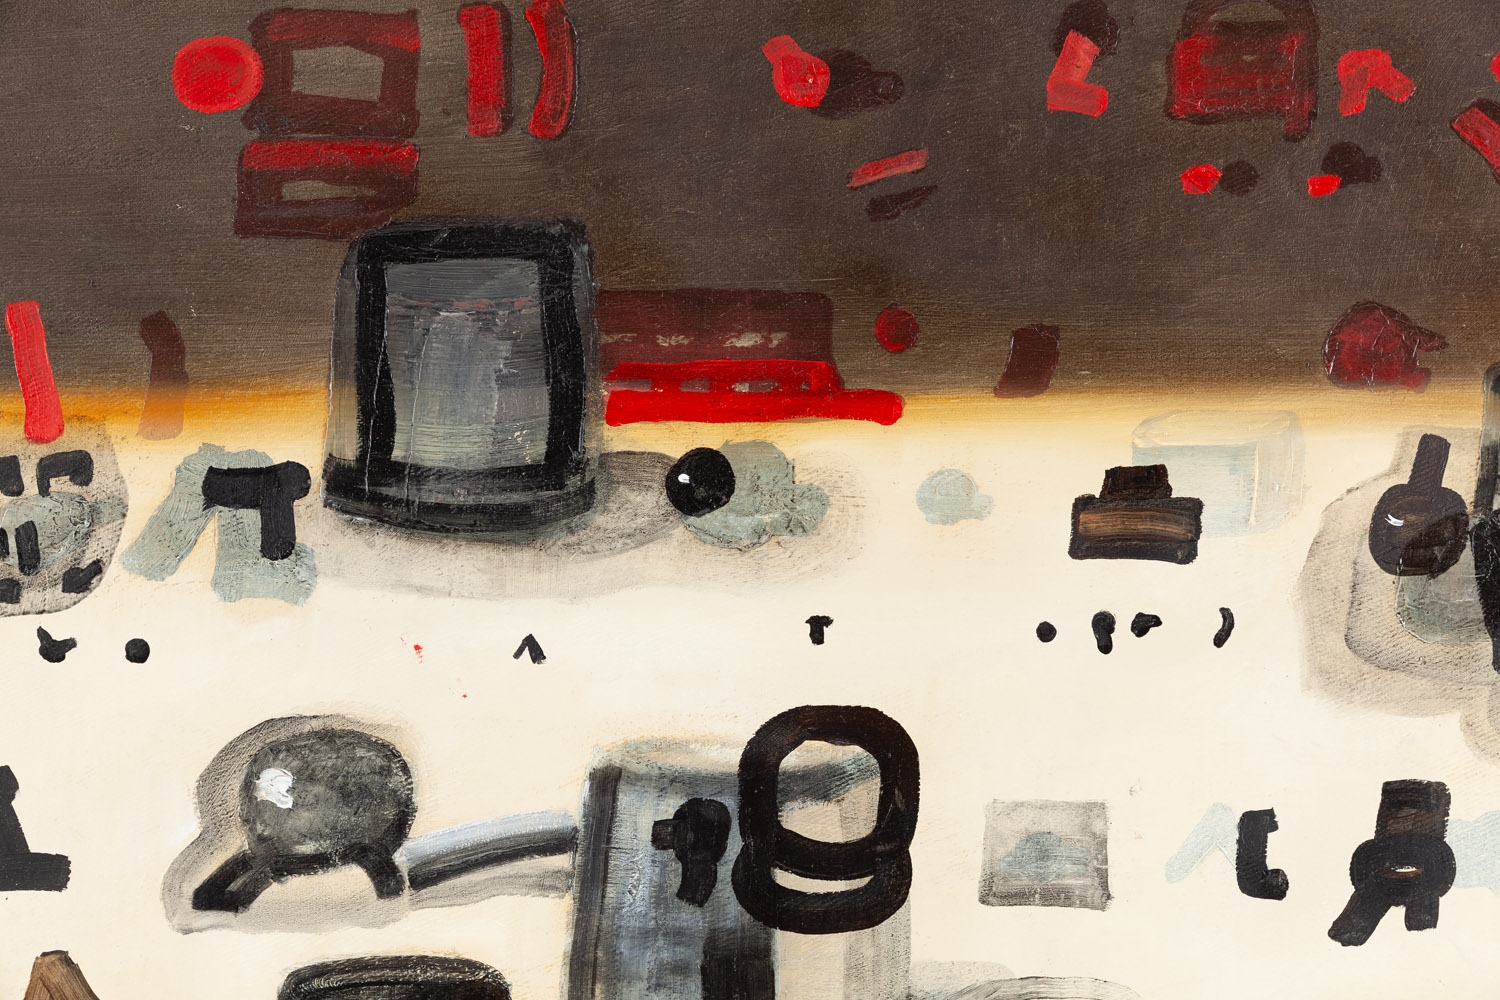 Artwork by Jan Tarasin, "Counted Items", Made of oil on canvas